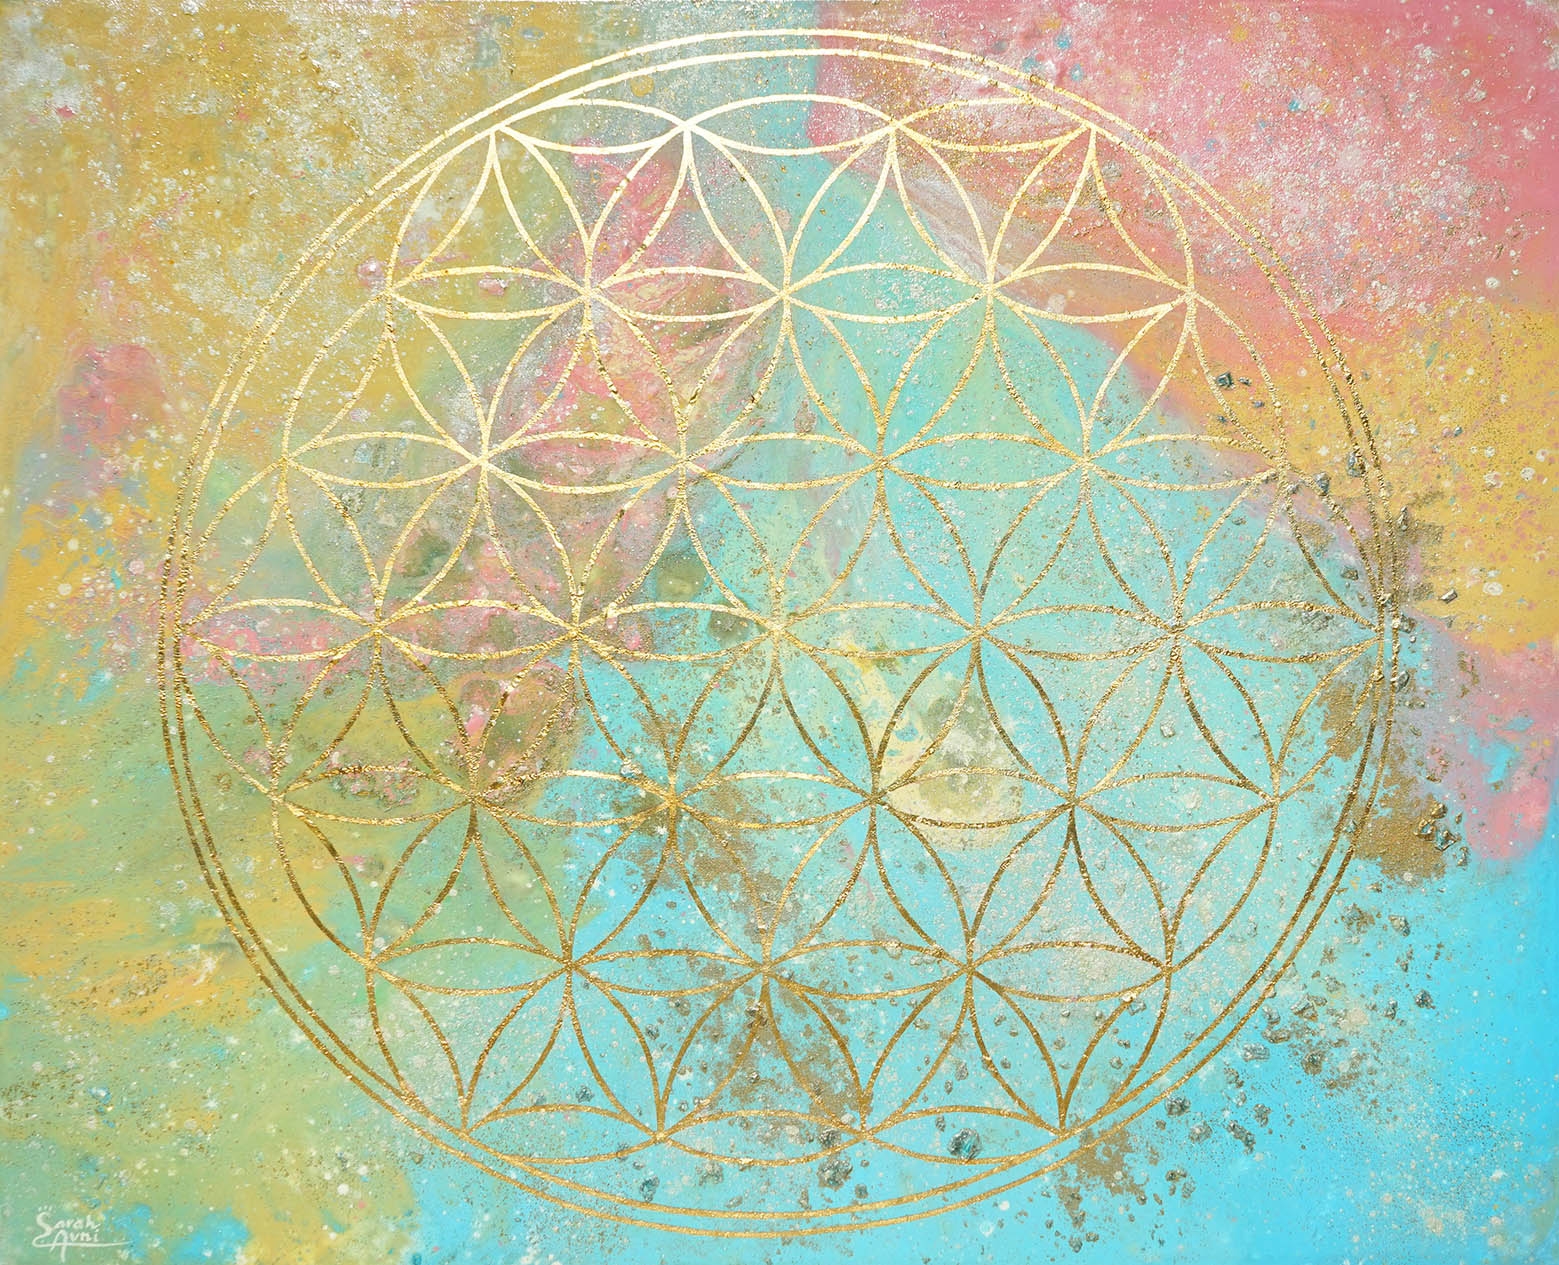 Flower of Life XII